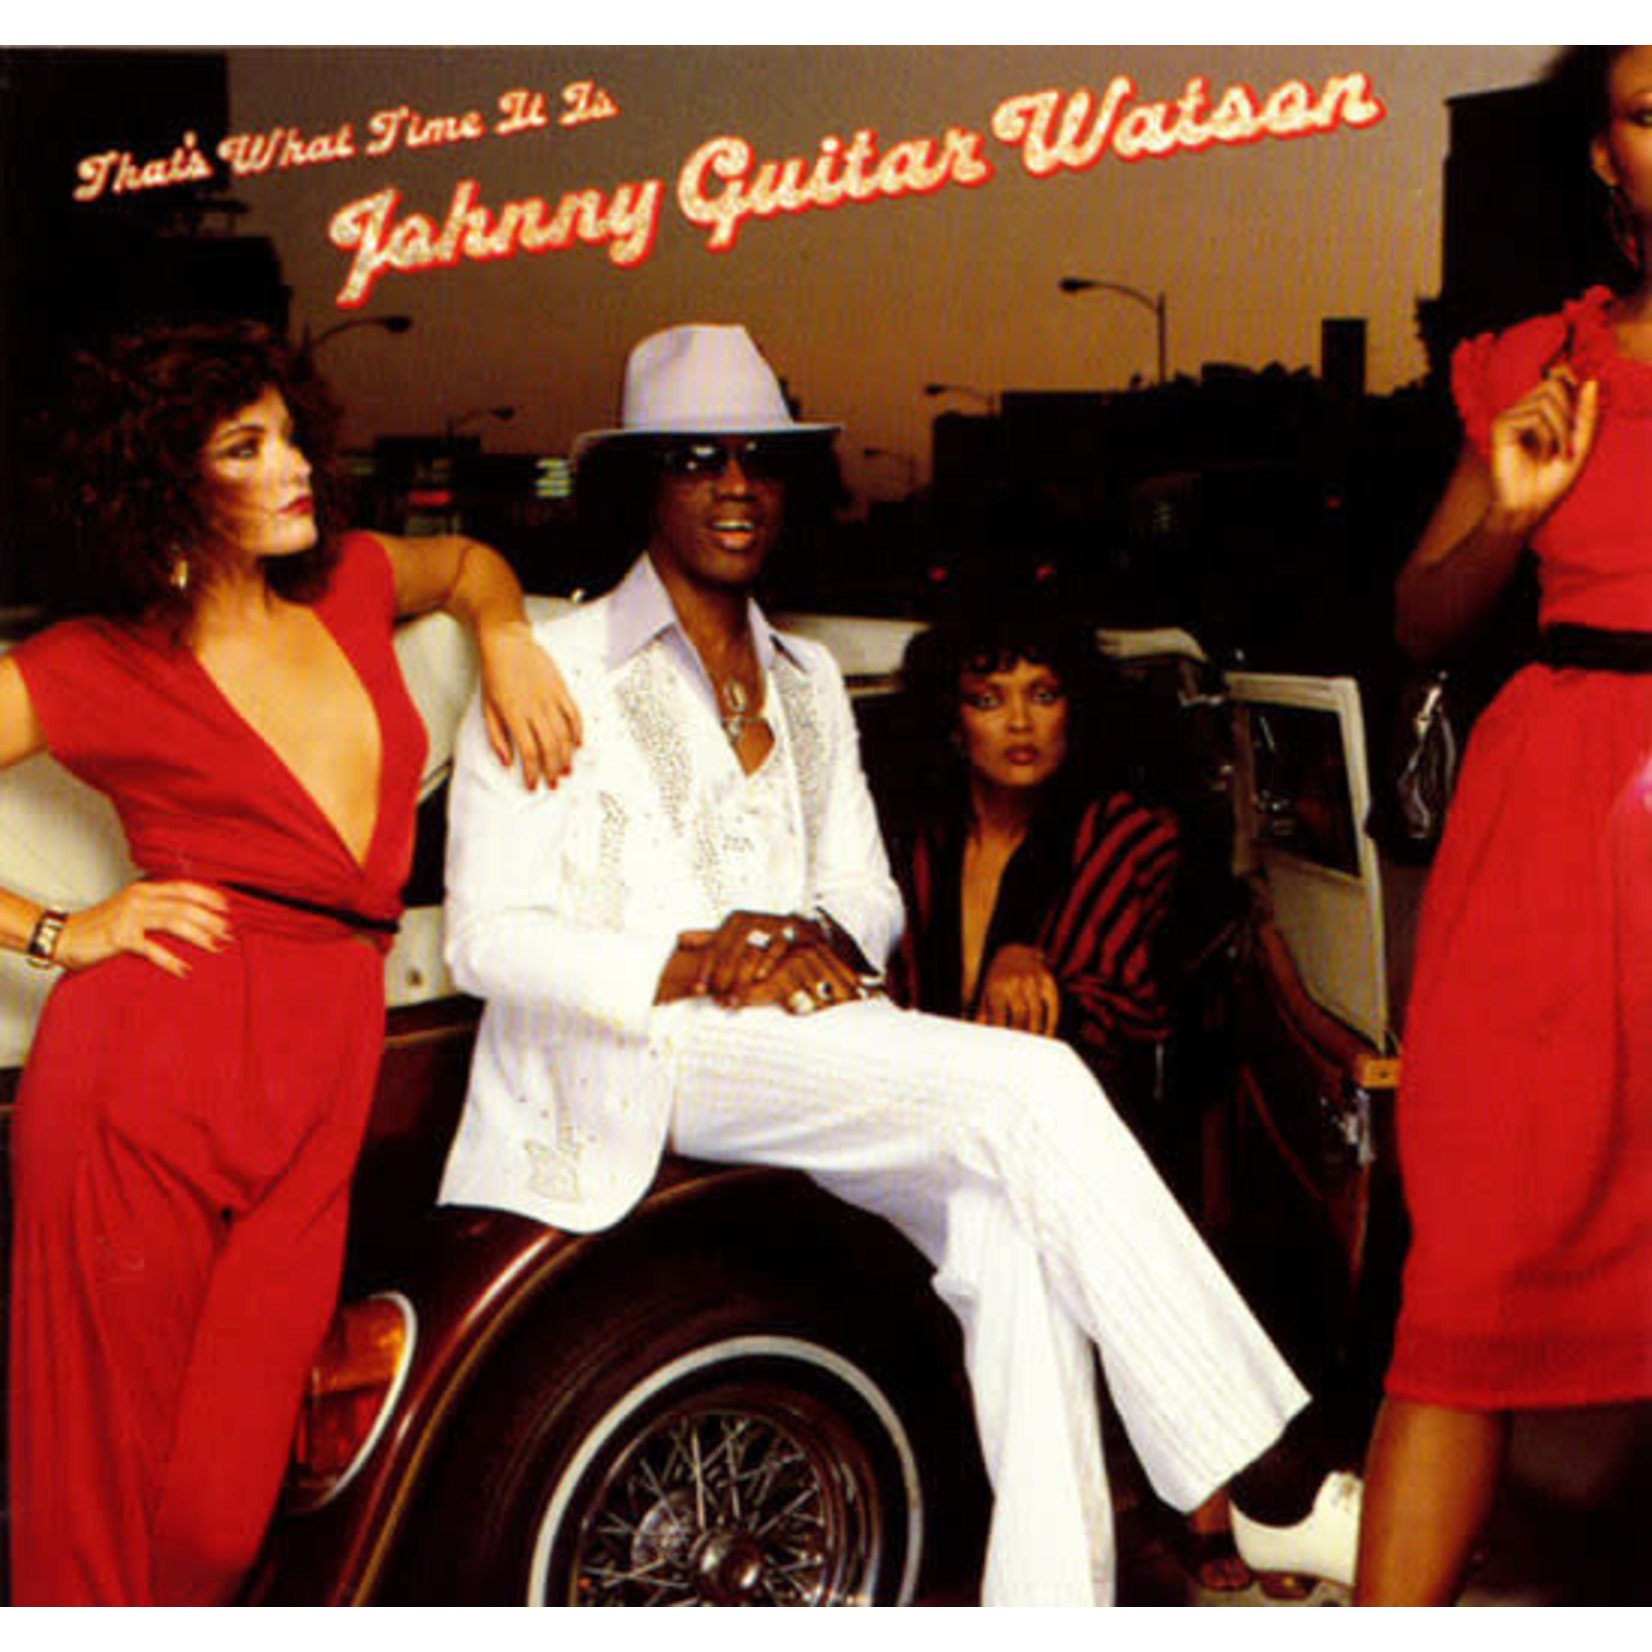 [Vintage] Johnny 'Guitar' Watson - That's What Time It Is